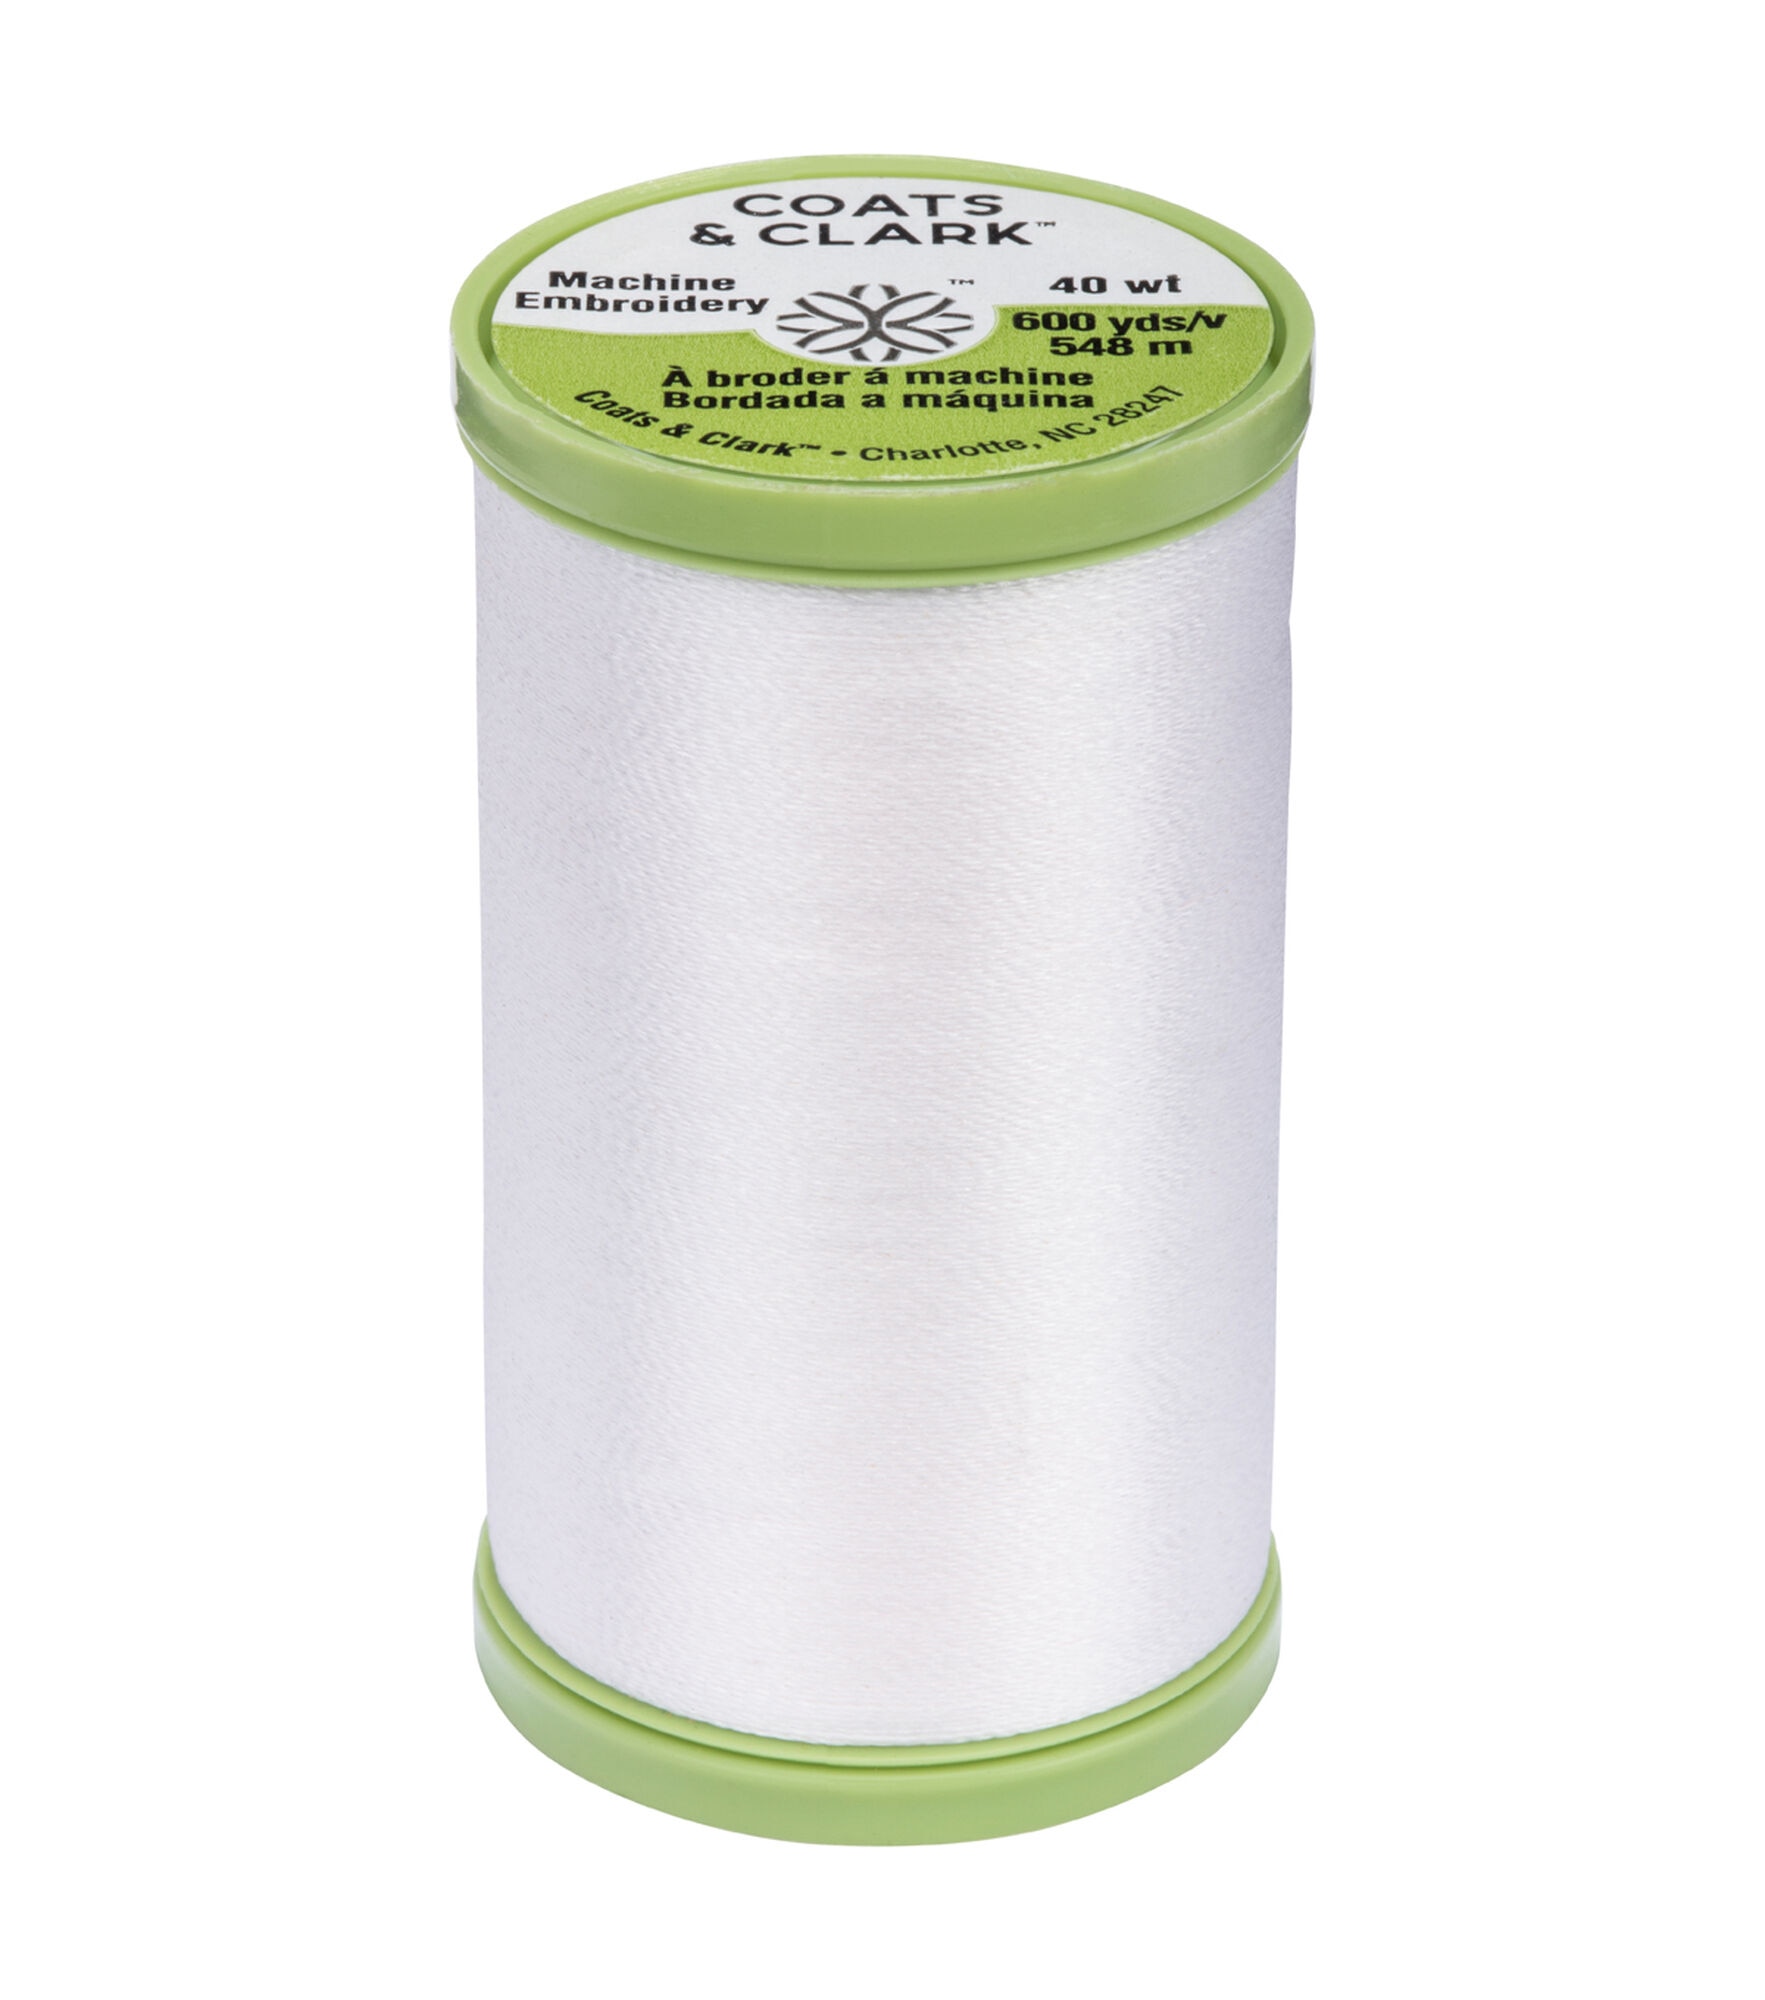 Simthread White Black Trilobal Polyester Embroidery thread Sewing Thread  40wt Tkt 120 Tex 27 in 1100Yds